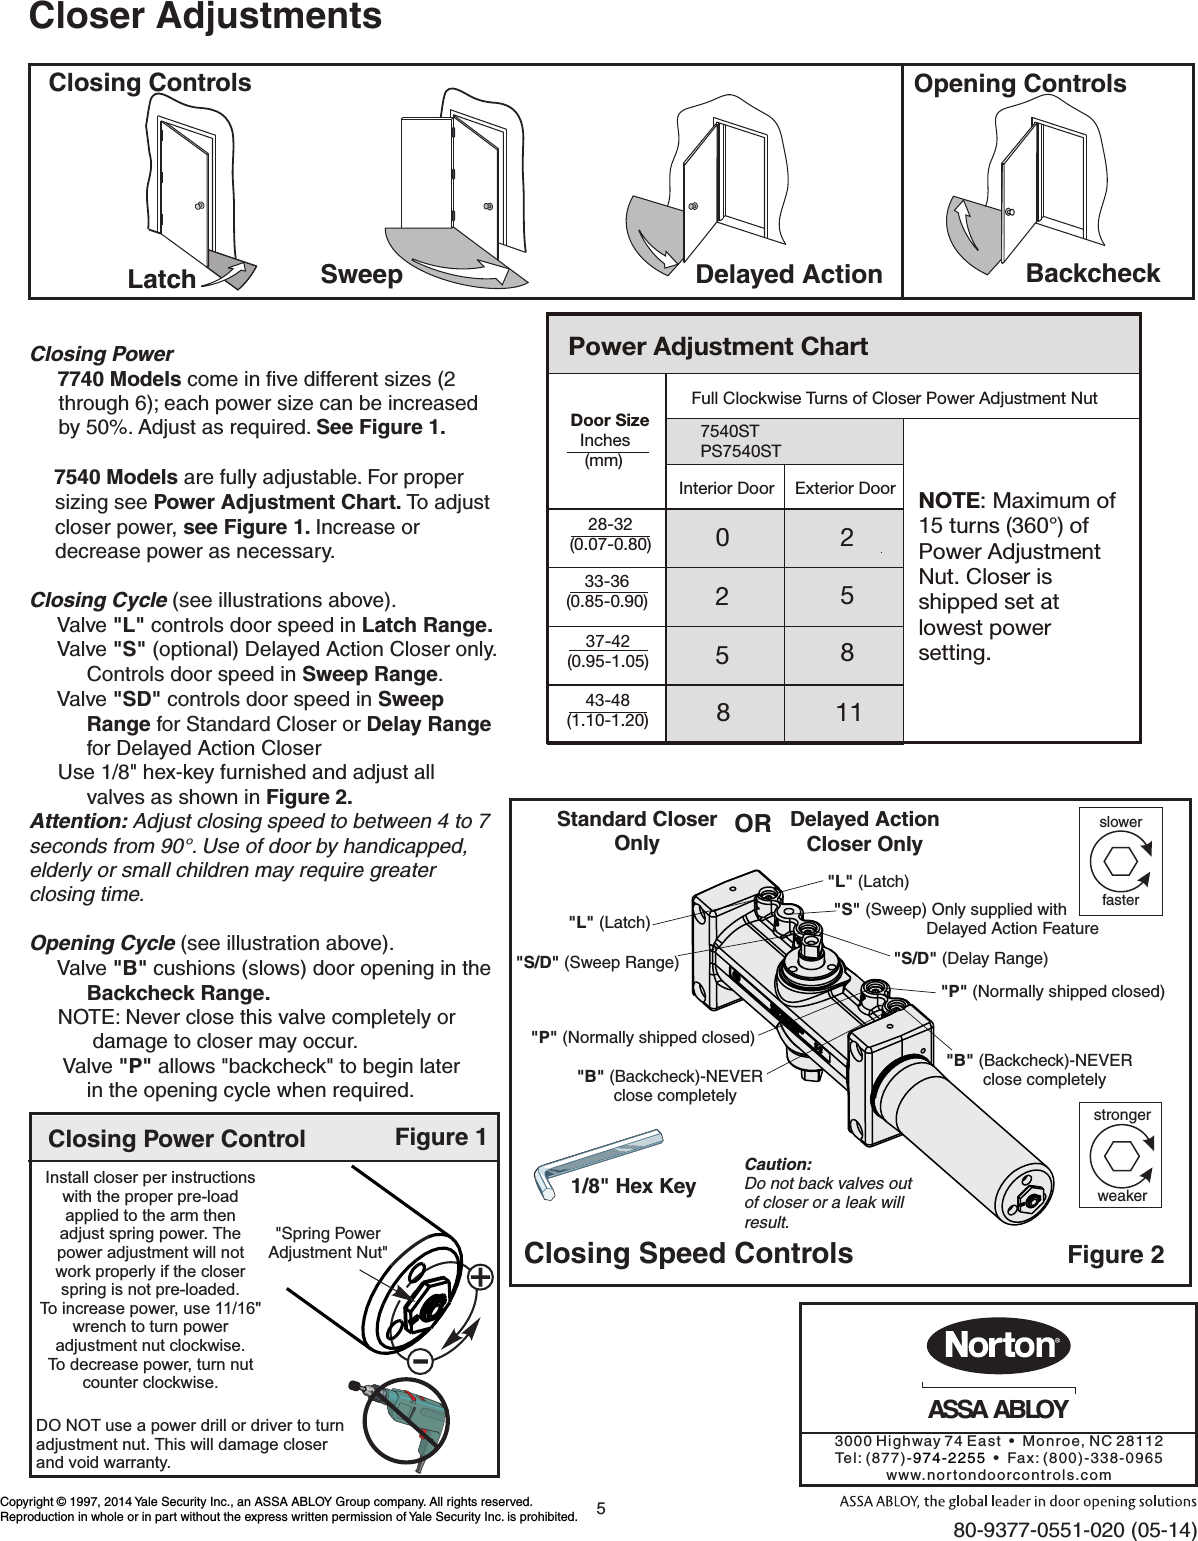 Page 5 of 5 - Norton  7540ST, 7740ST, Track Push Or Pull, Non-Hold Open 80-9377-0551-020